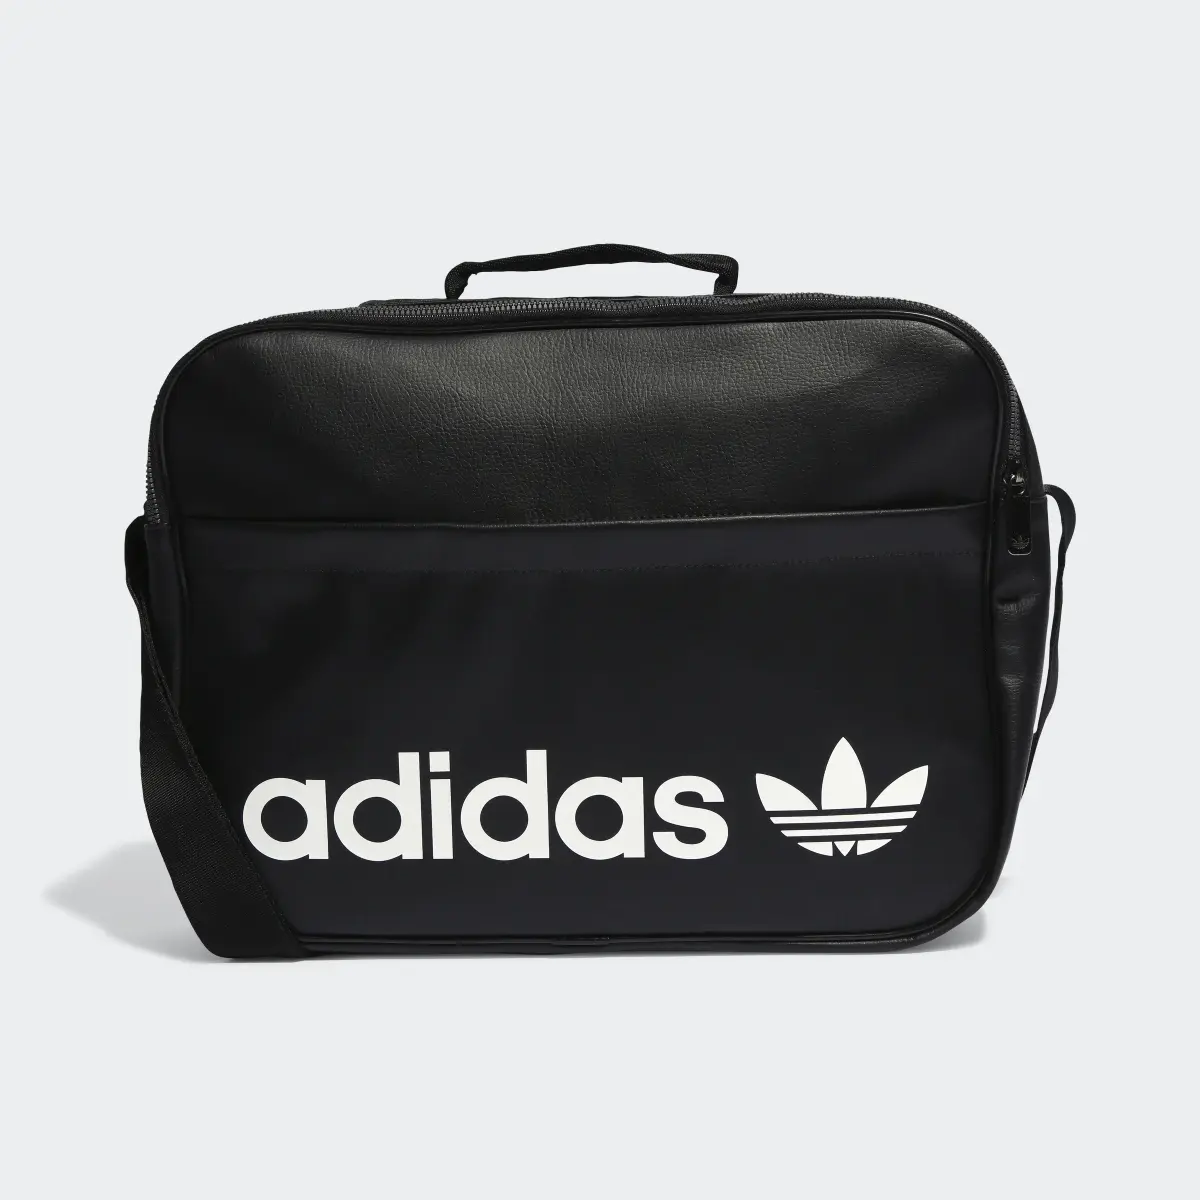 Adidas Archive Airliner Bag. 2